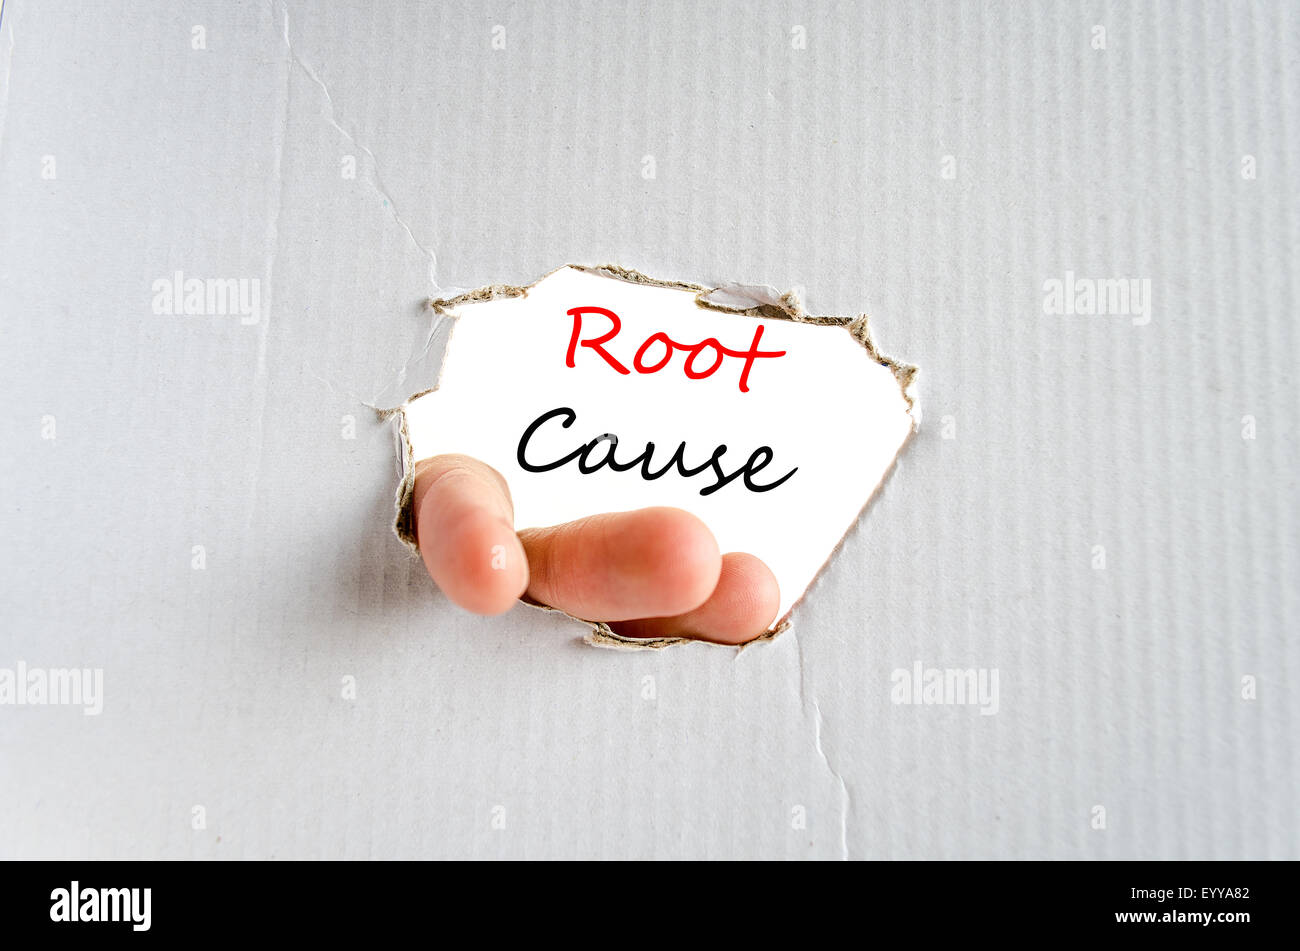 Root cause text concept isolated over white background Stock Photo